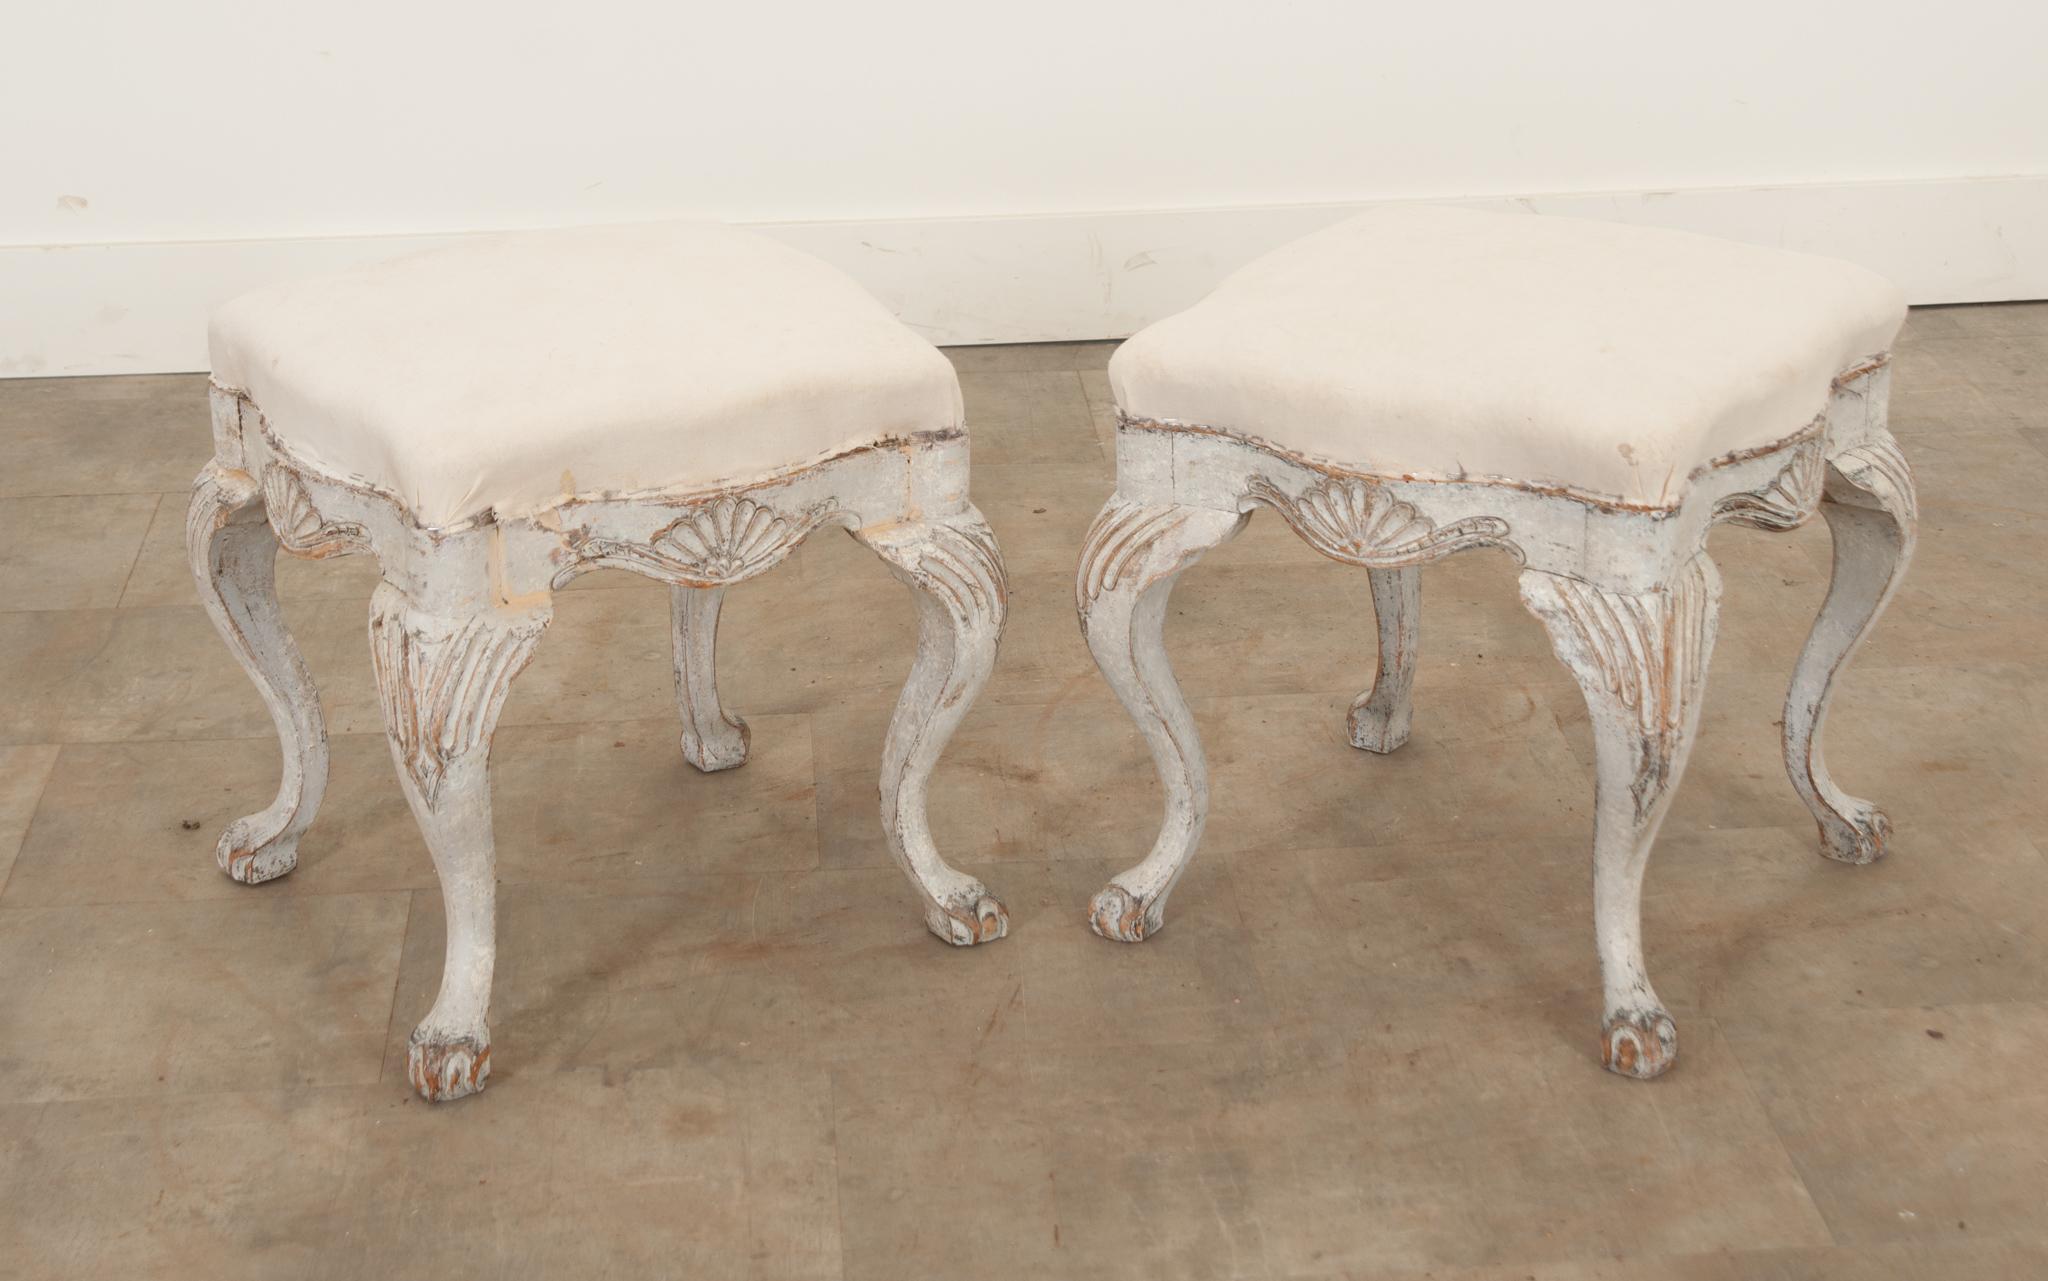 This darling pair of stools are the perfect way to spruce up any interior. Covered in a cream muslin fabric, they are ready to be upholstered in whatever fabric you love best. The wonderfully worn painted finish adds a great texture and patina to